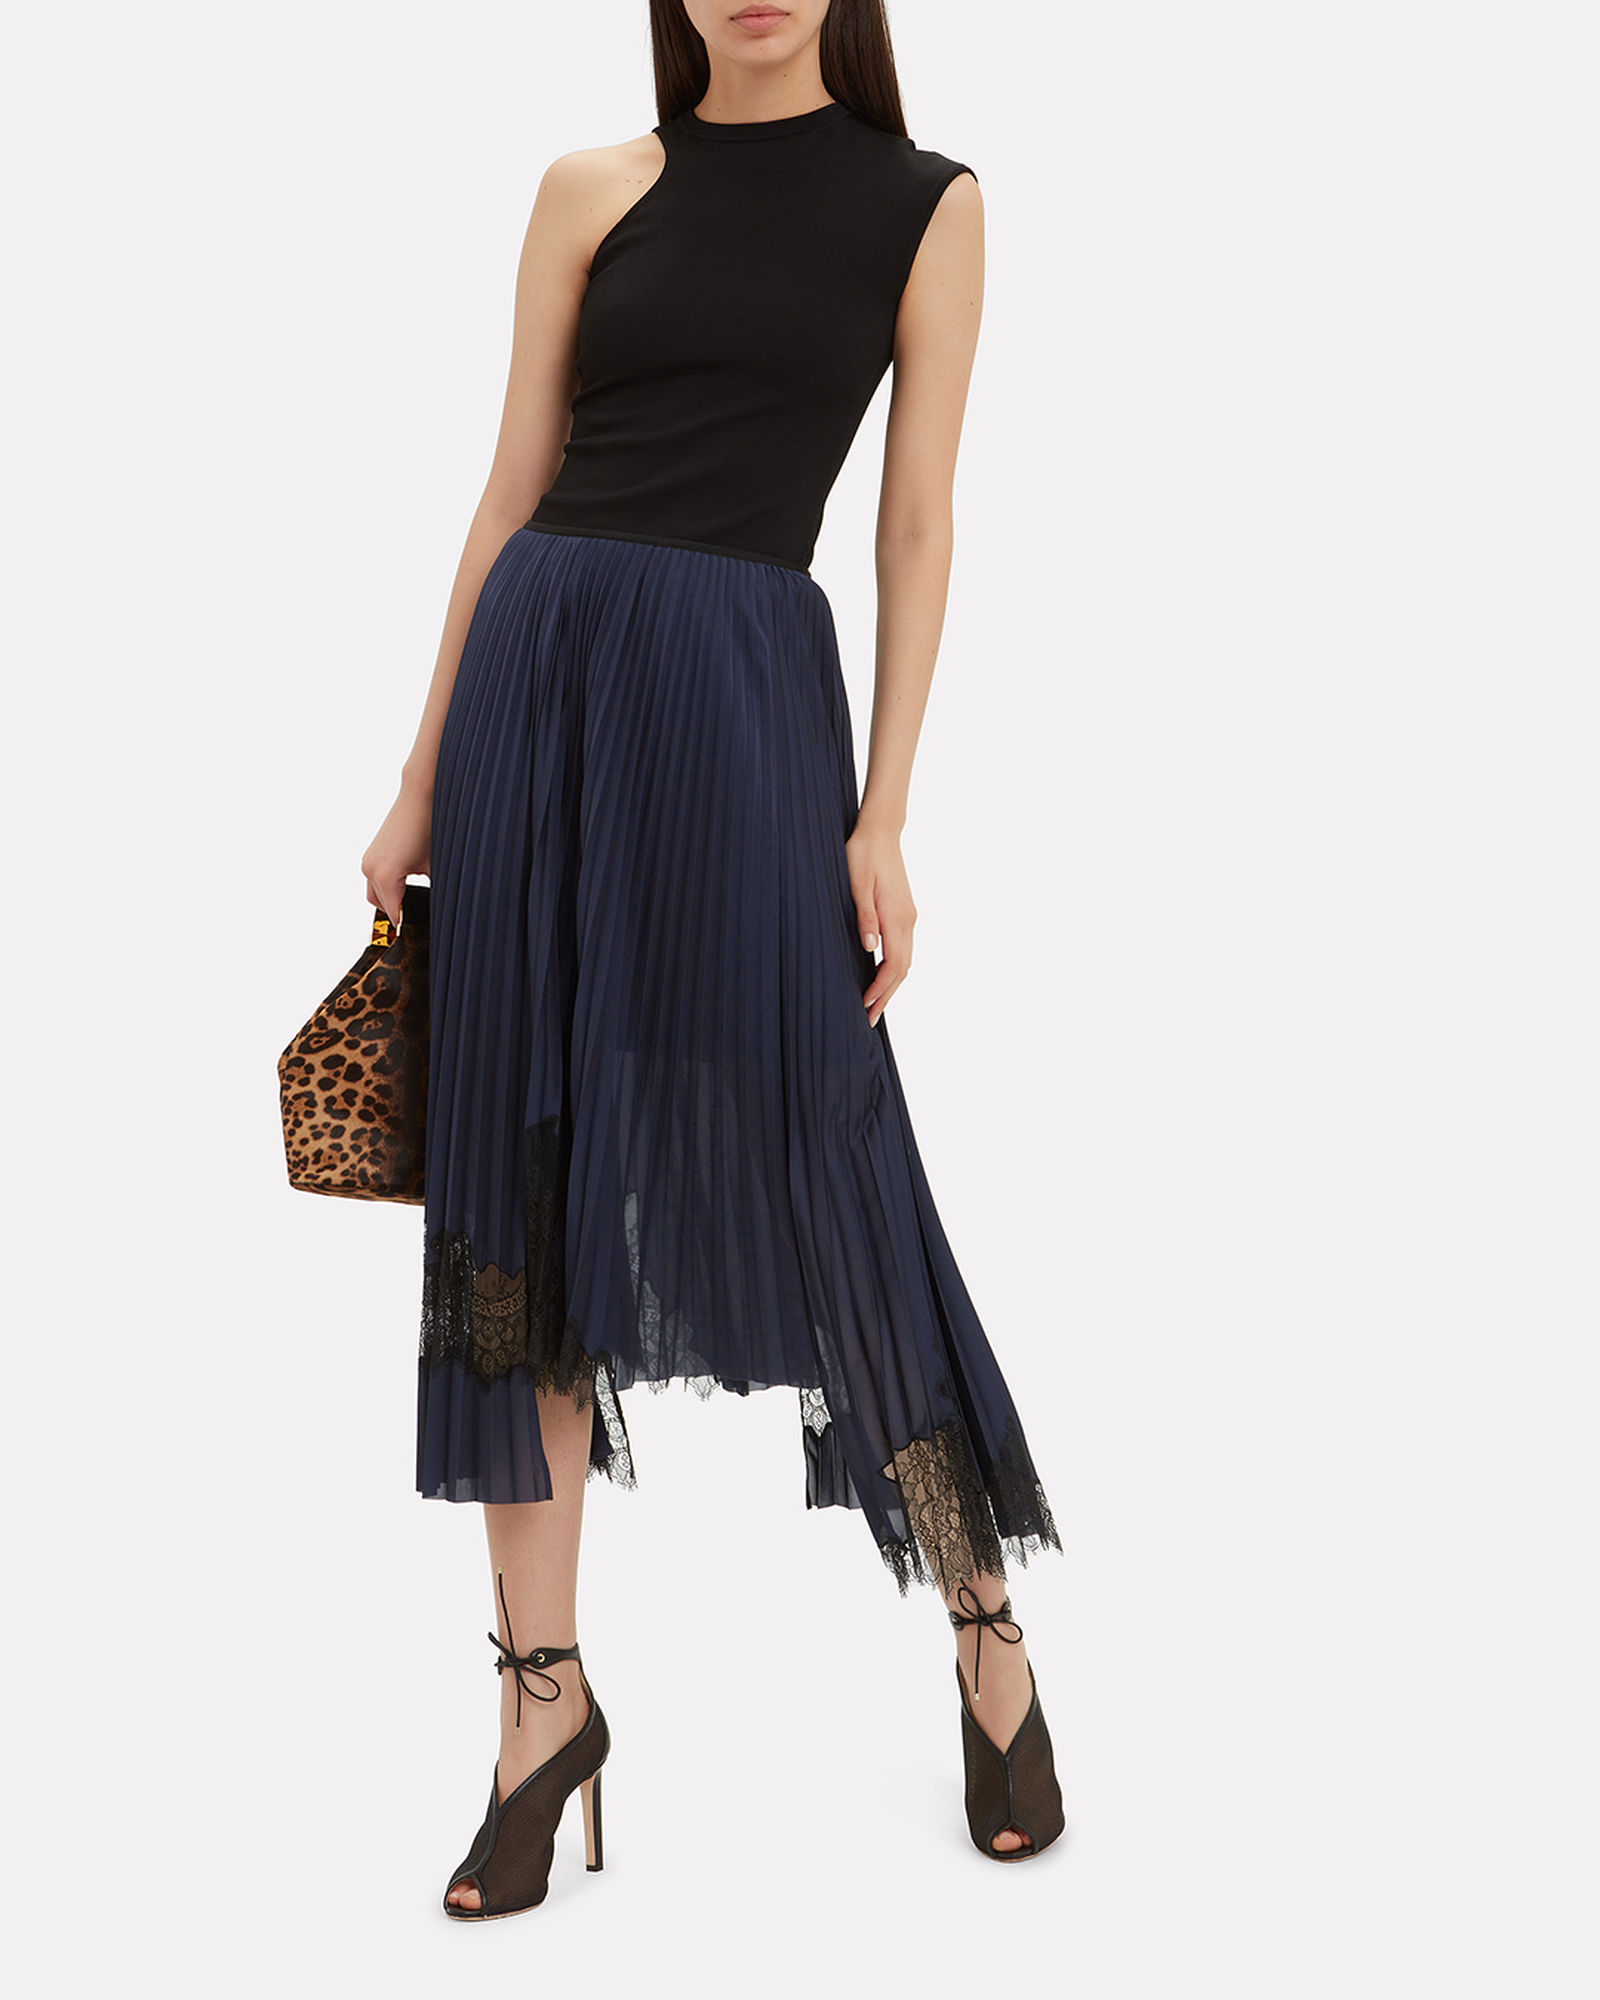 Helmut Lang - Lace-Trimmed Pleated Skirt - Navy | ABOUT ICONS